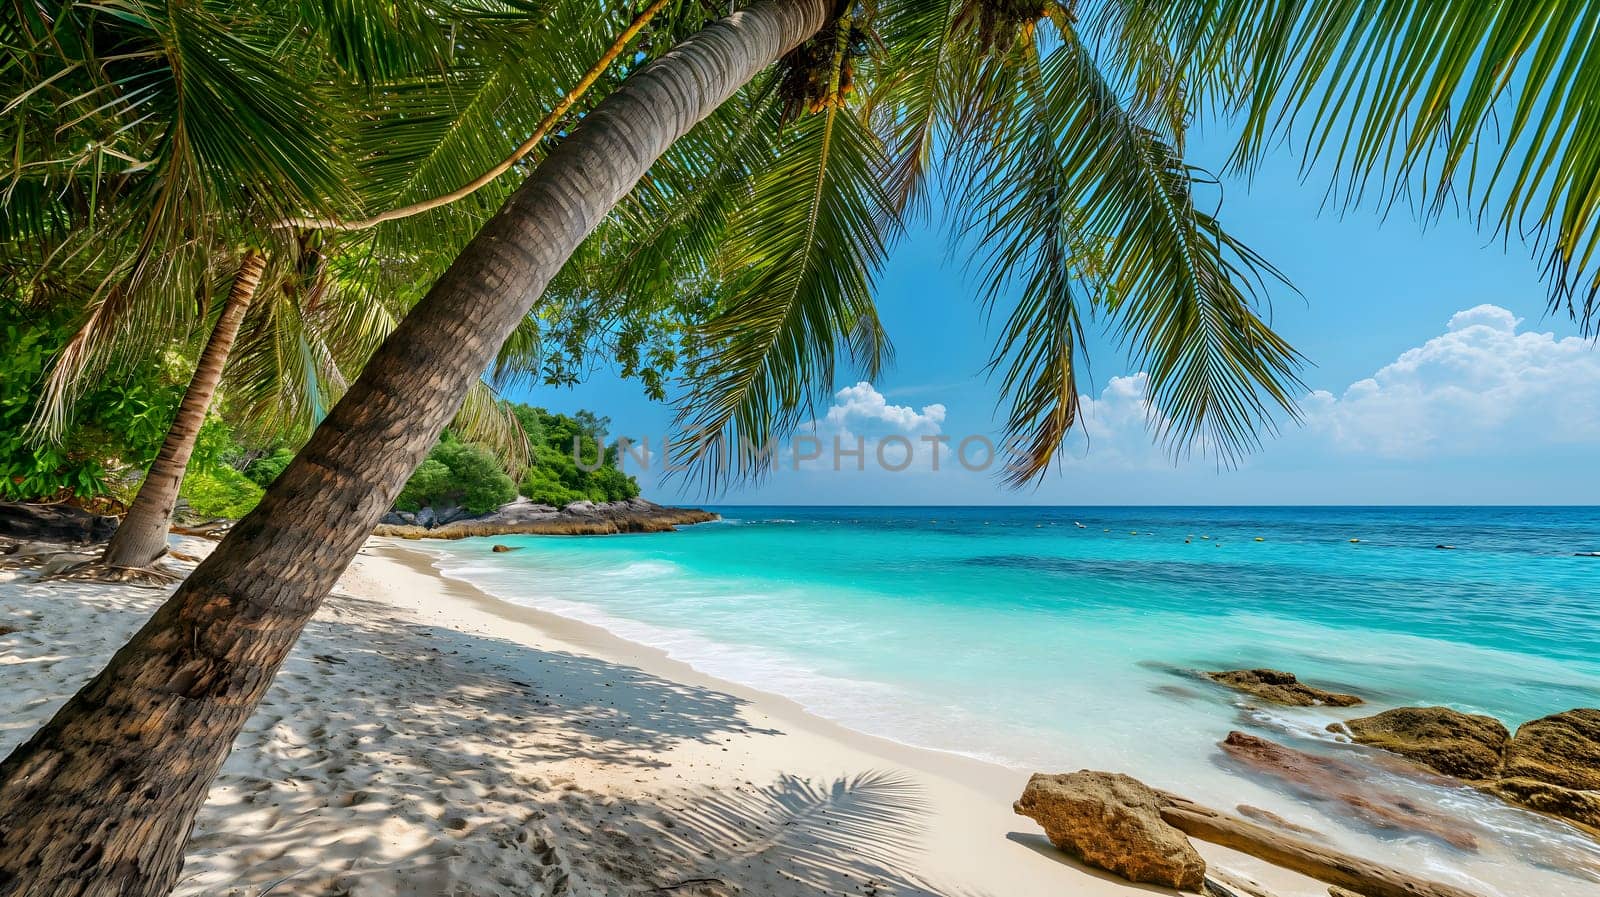 tropical beach view at sunny day with white sand, turquoise water and palm tree, neural network generated image by z1b